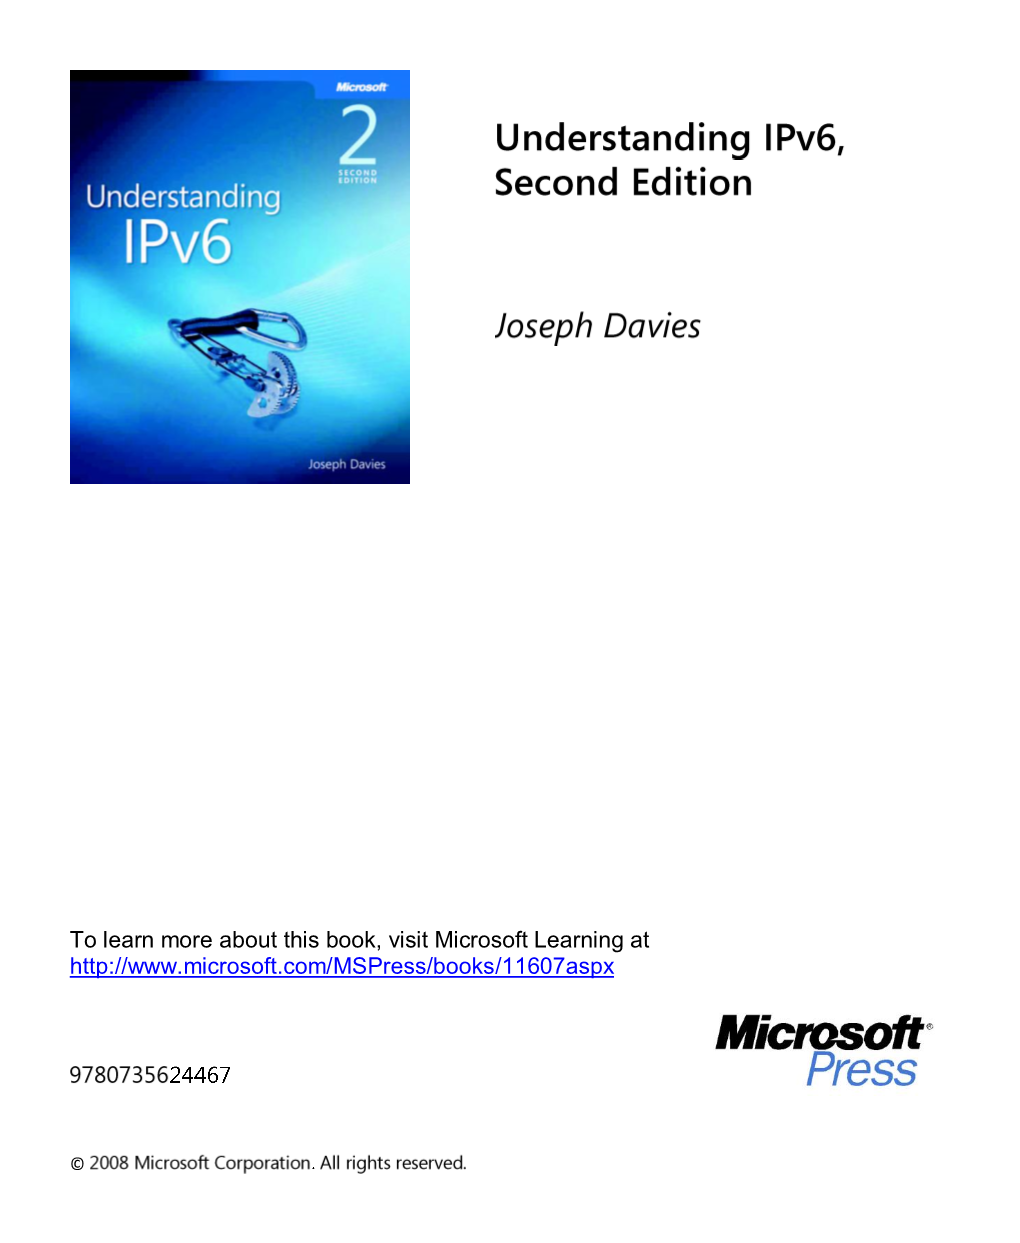 Sample Content from Understanding Ipv6, Second Edition